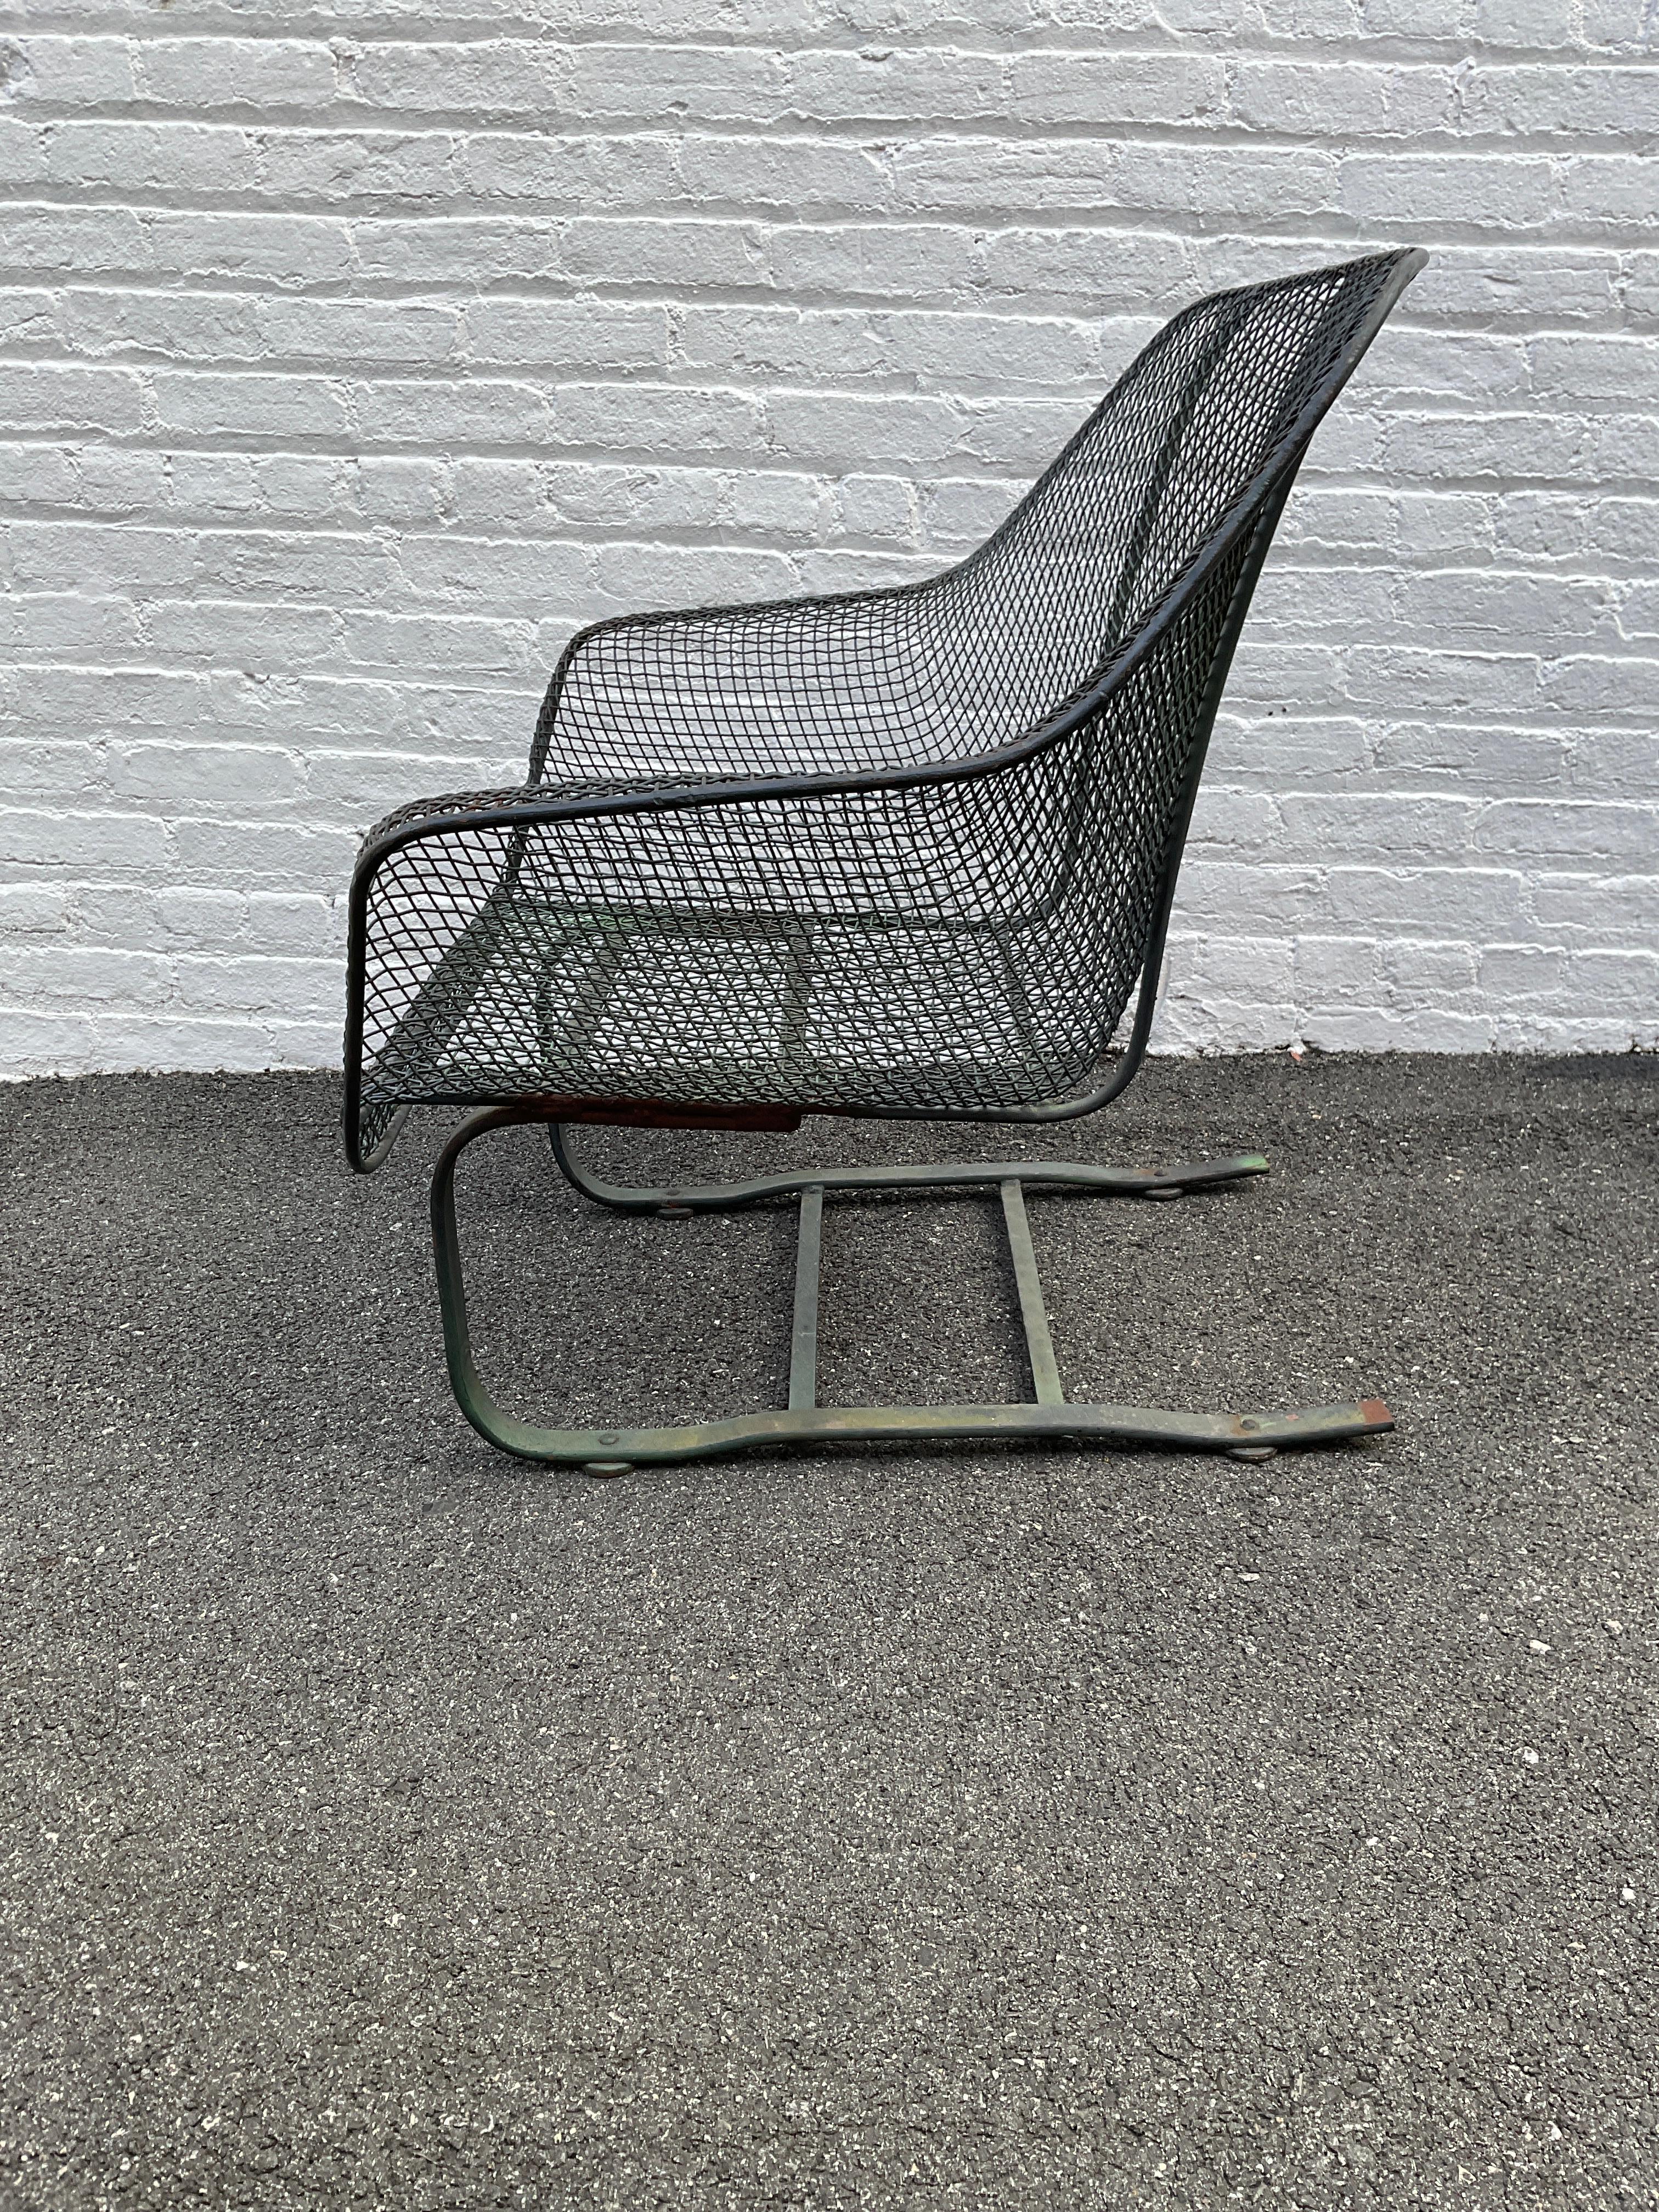 1960s Sculptura Spring Chair In Good Condition For Sale In Tarrytown, NY